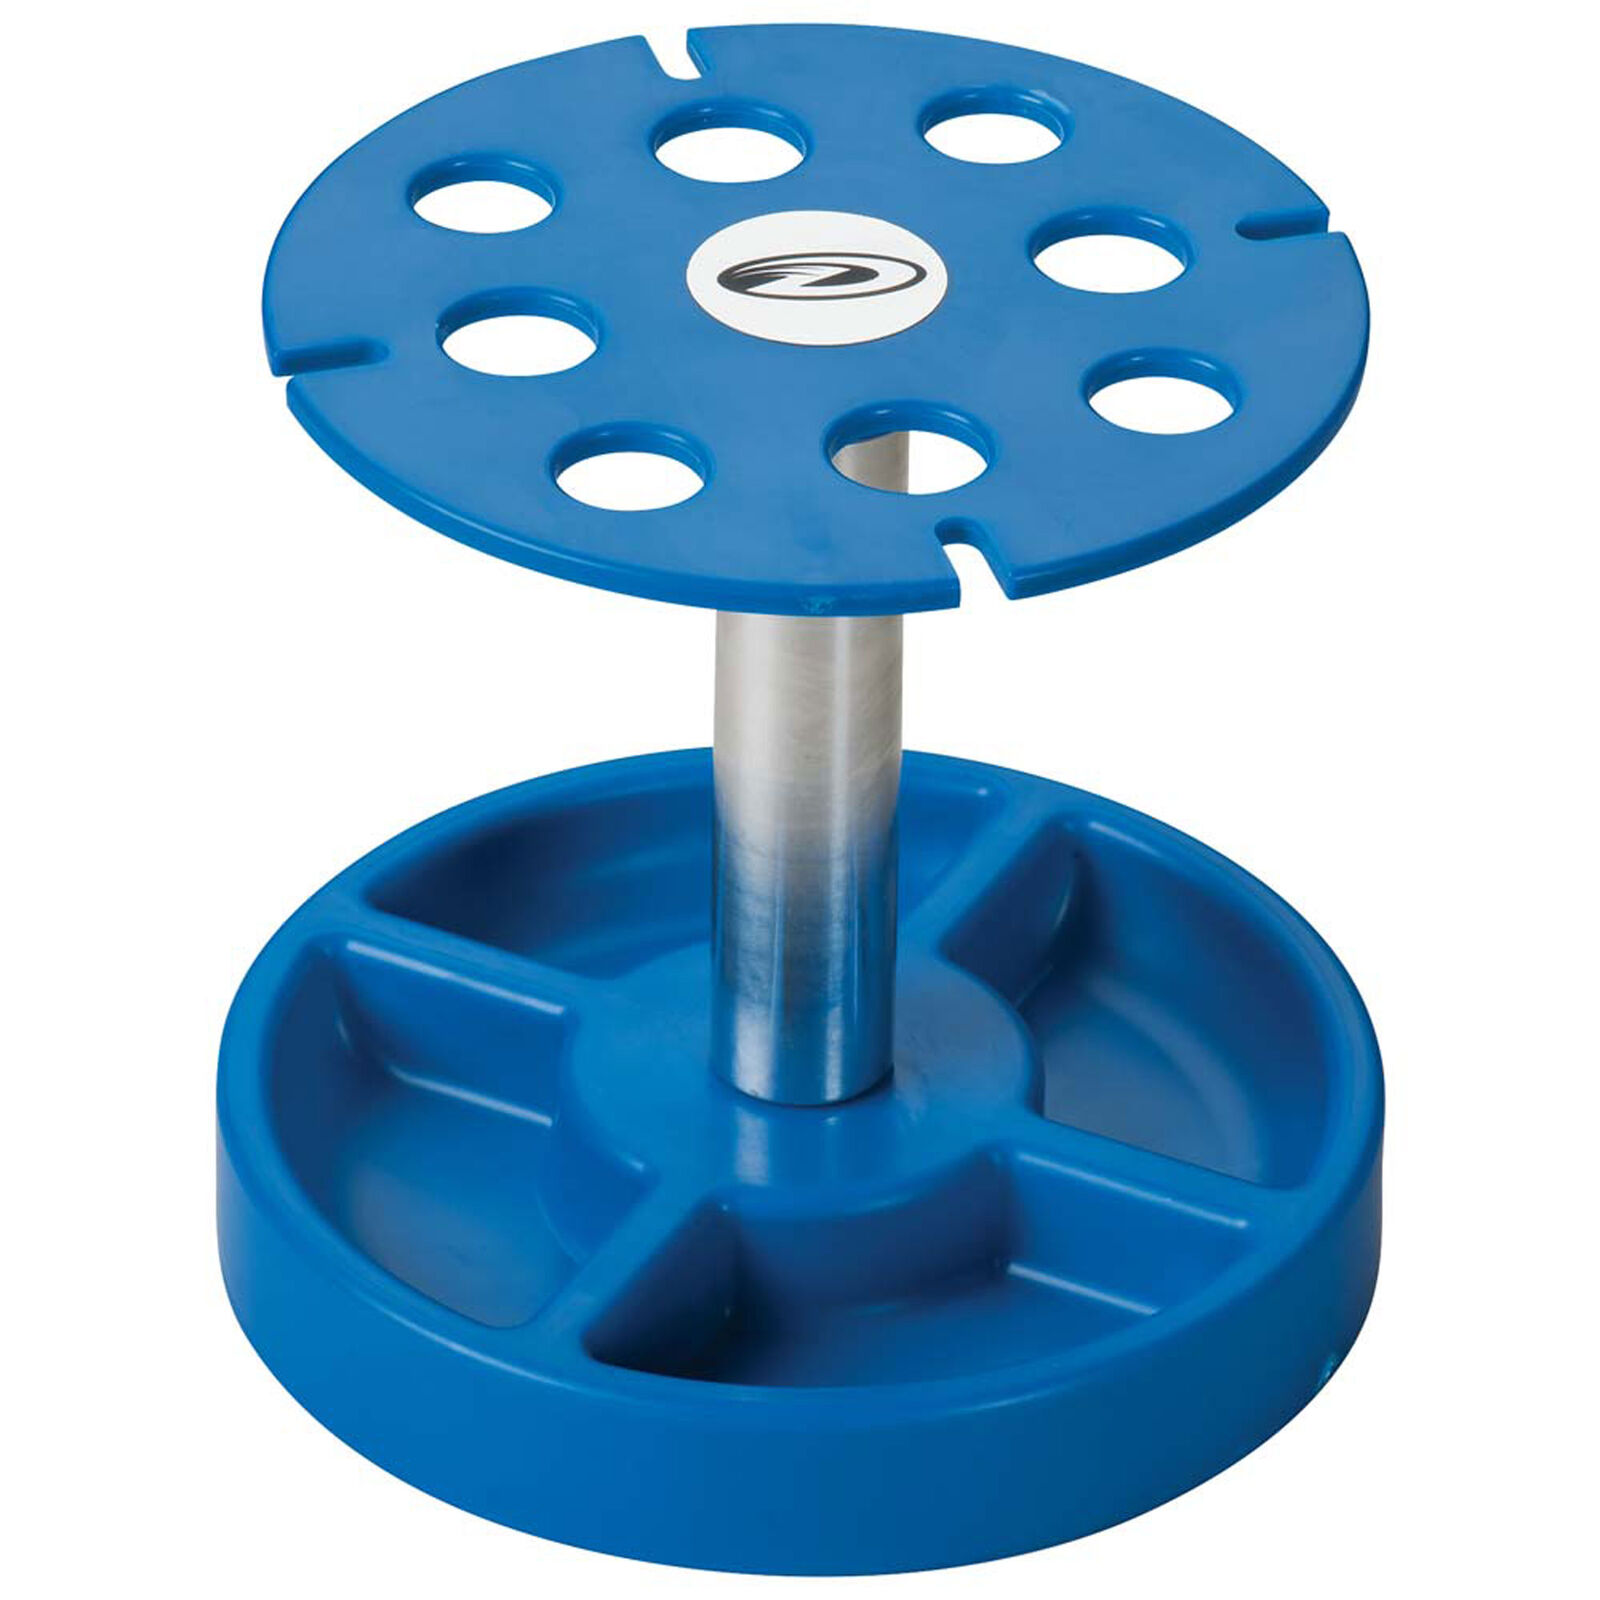 Pit Tech Deluxe Shock Stand, Blue